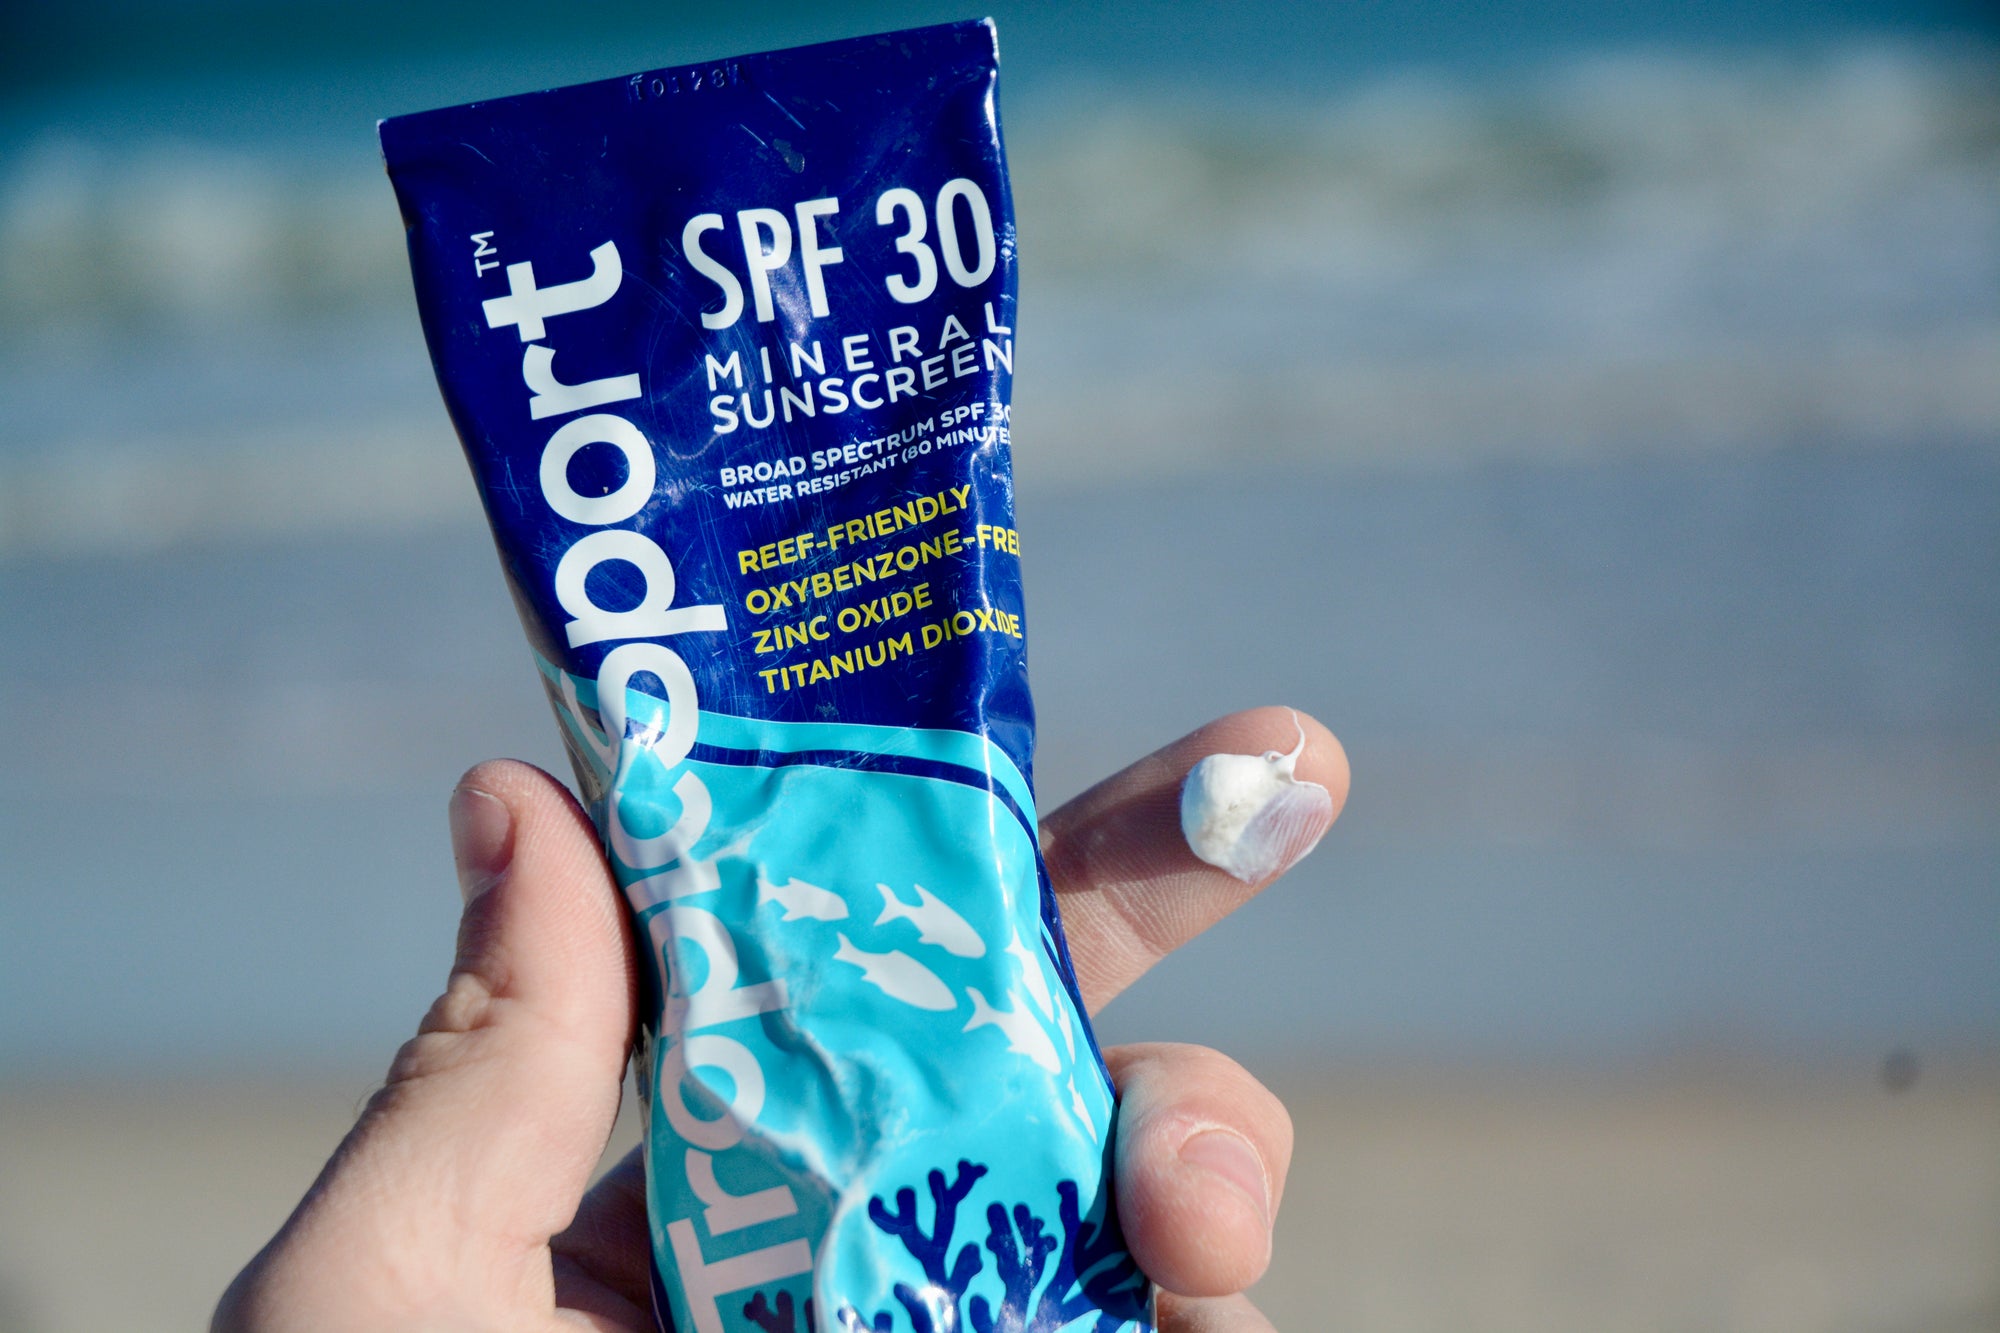 Combining Mineral and Chemical Sunscreen